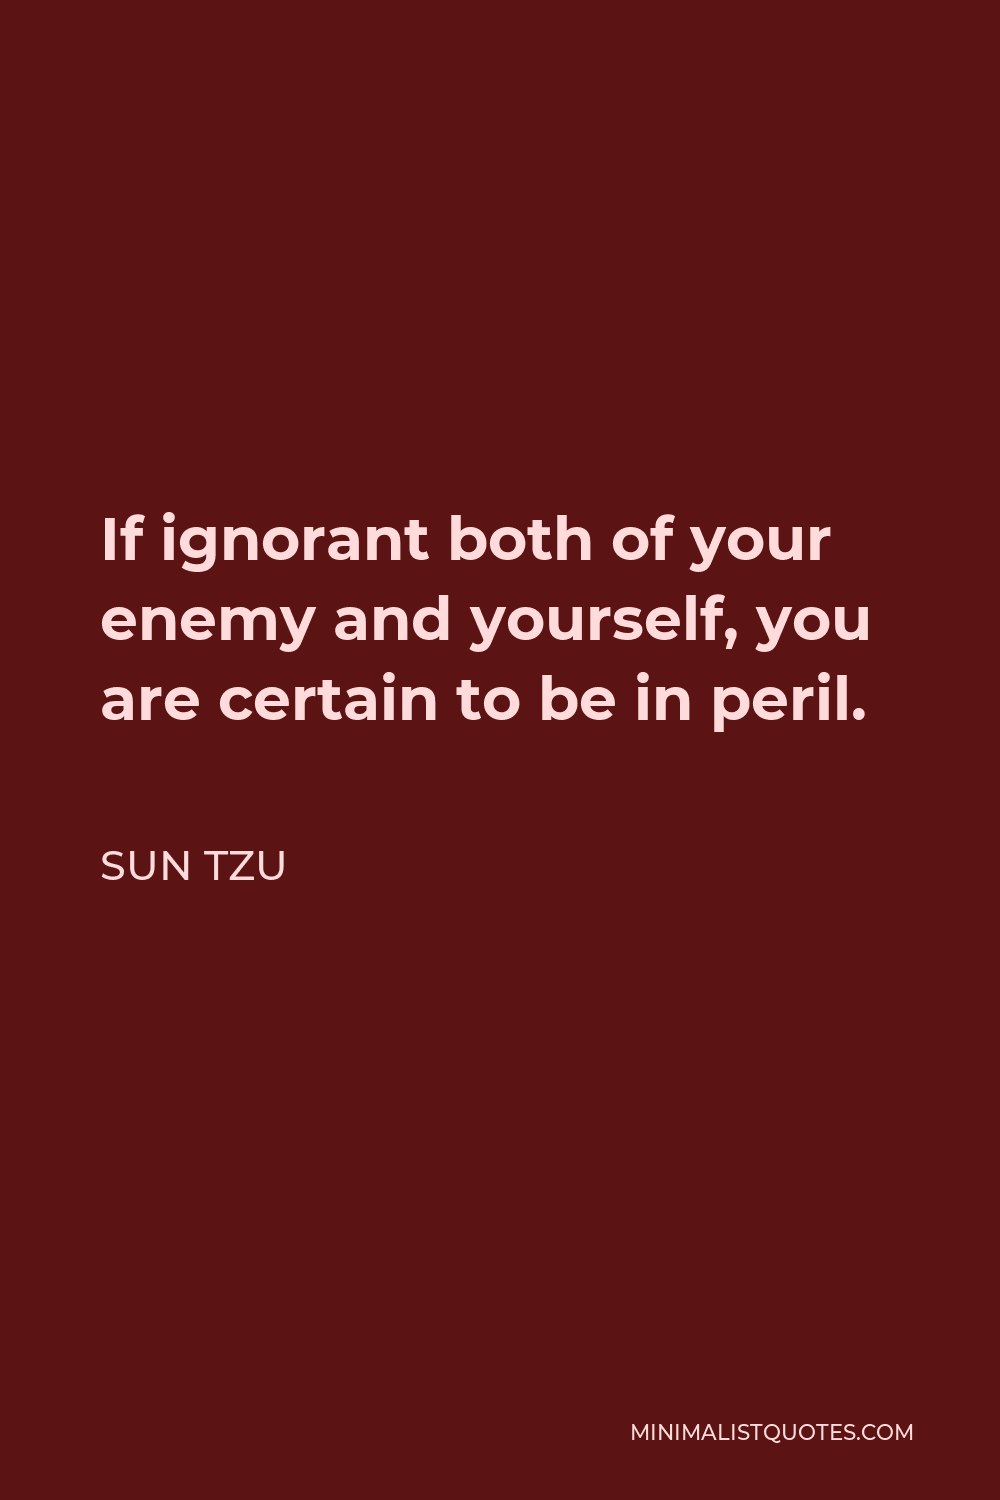 Sun Tzu Quote - If ignorant both of your enemy and yourself, you are certain to be in peril.